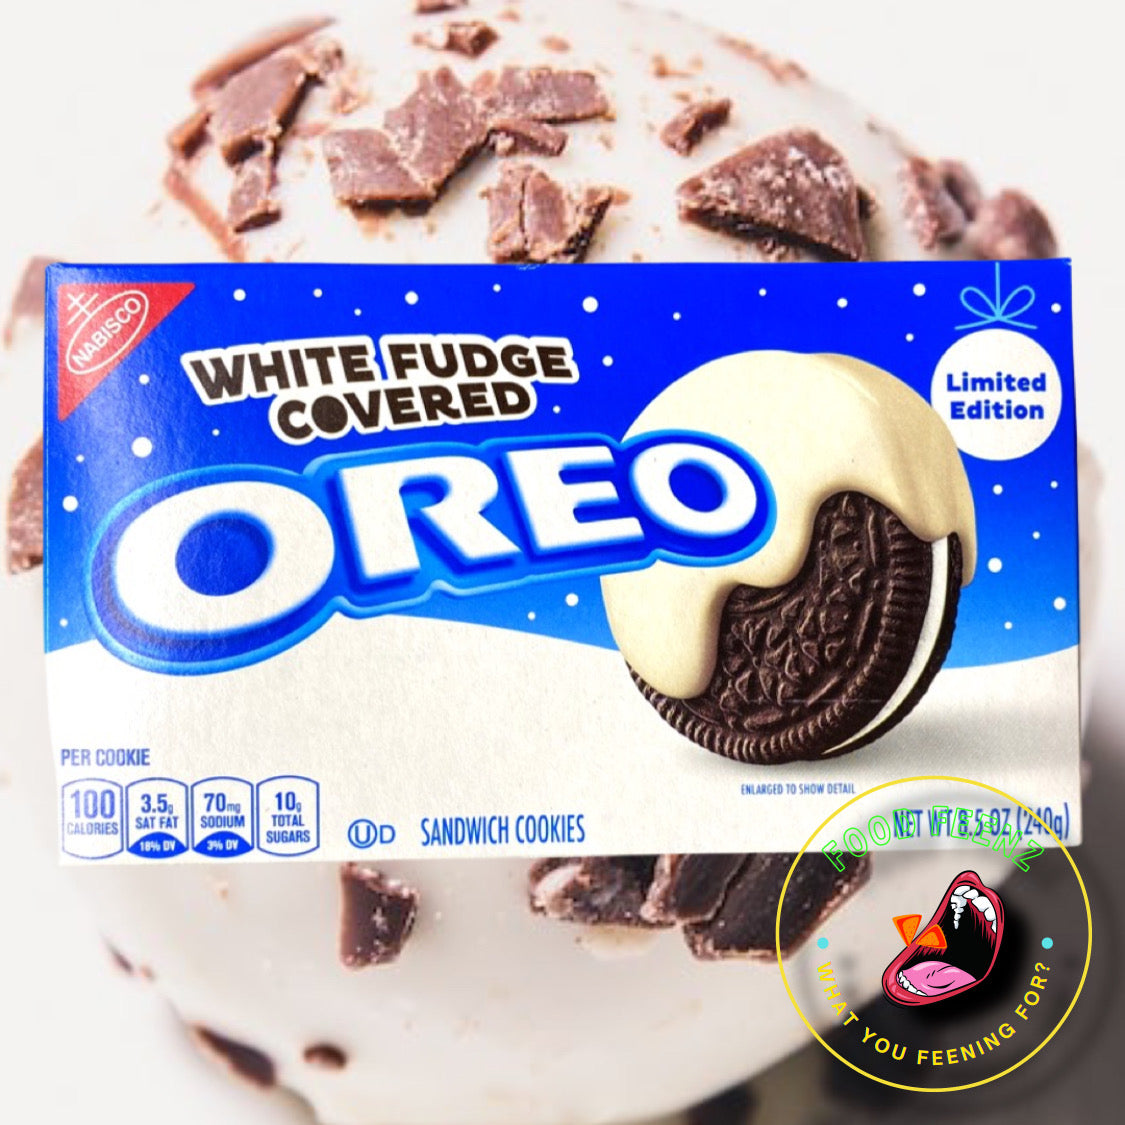 Oreo White Fudge Covered (Limited Edition)